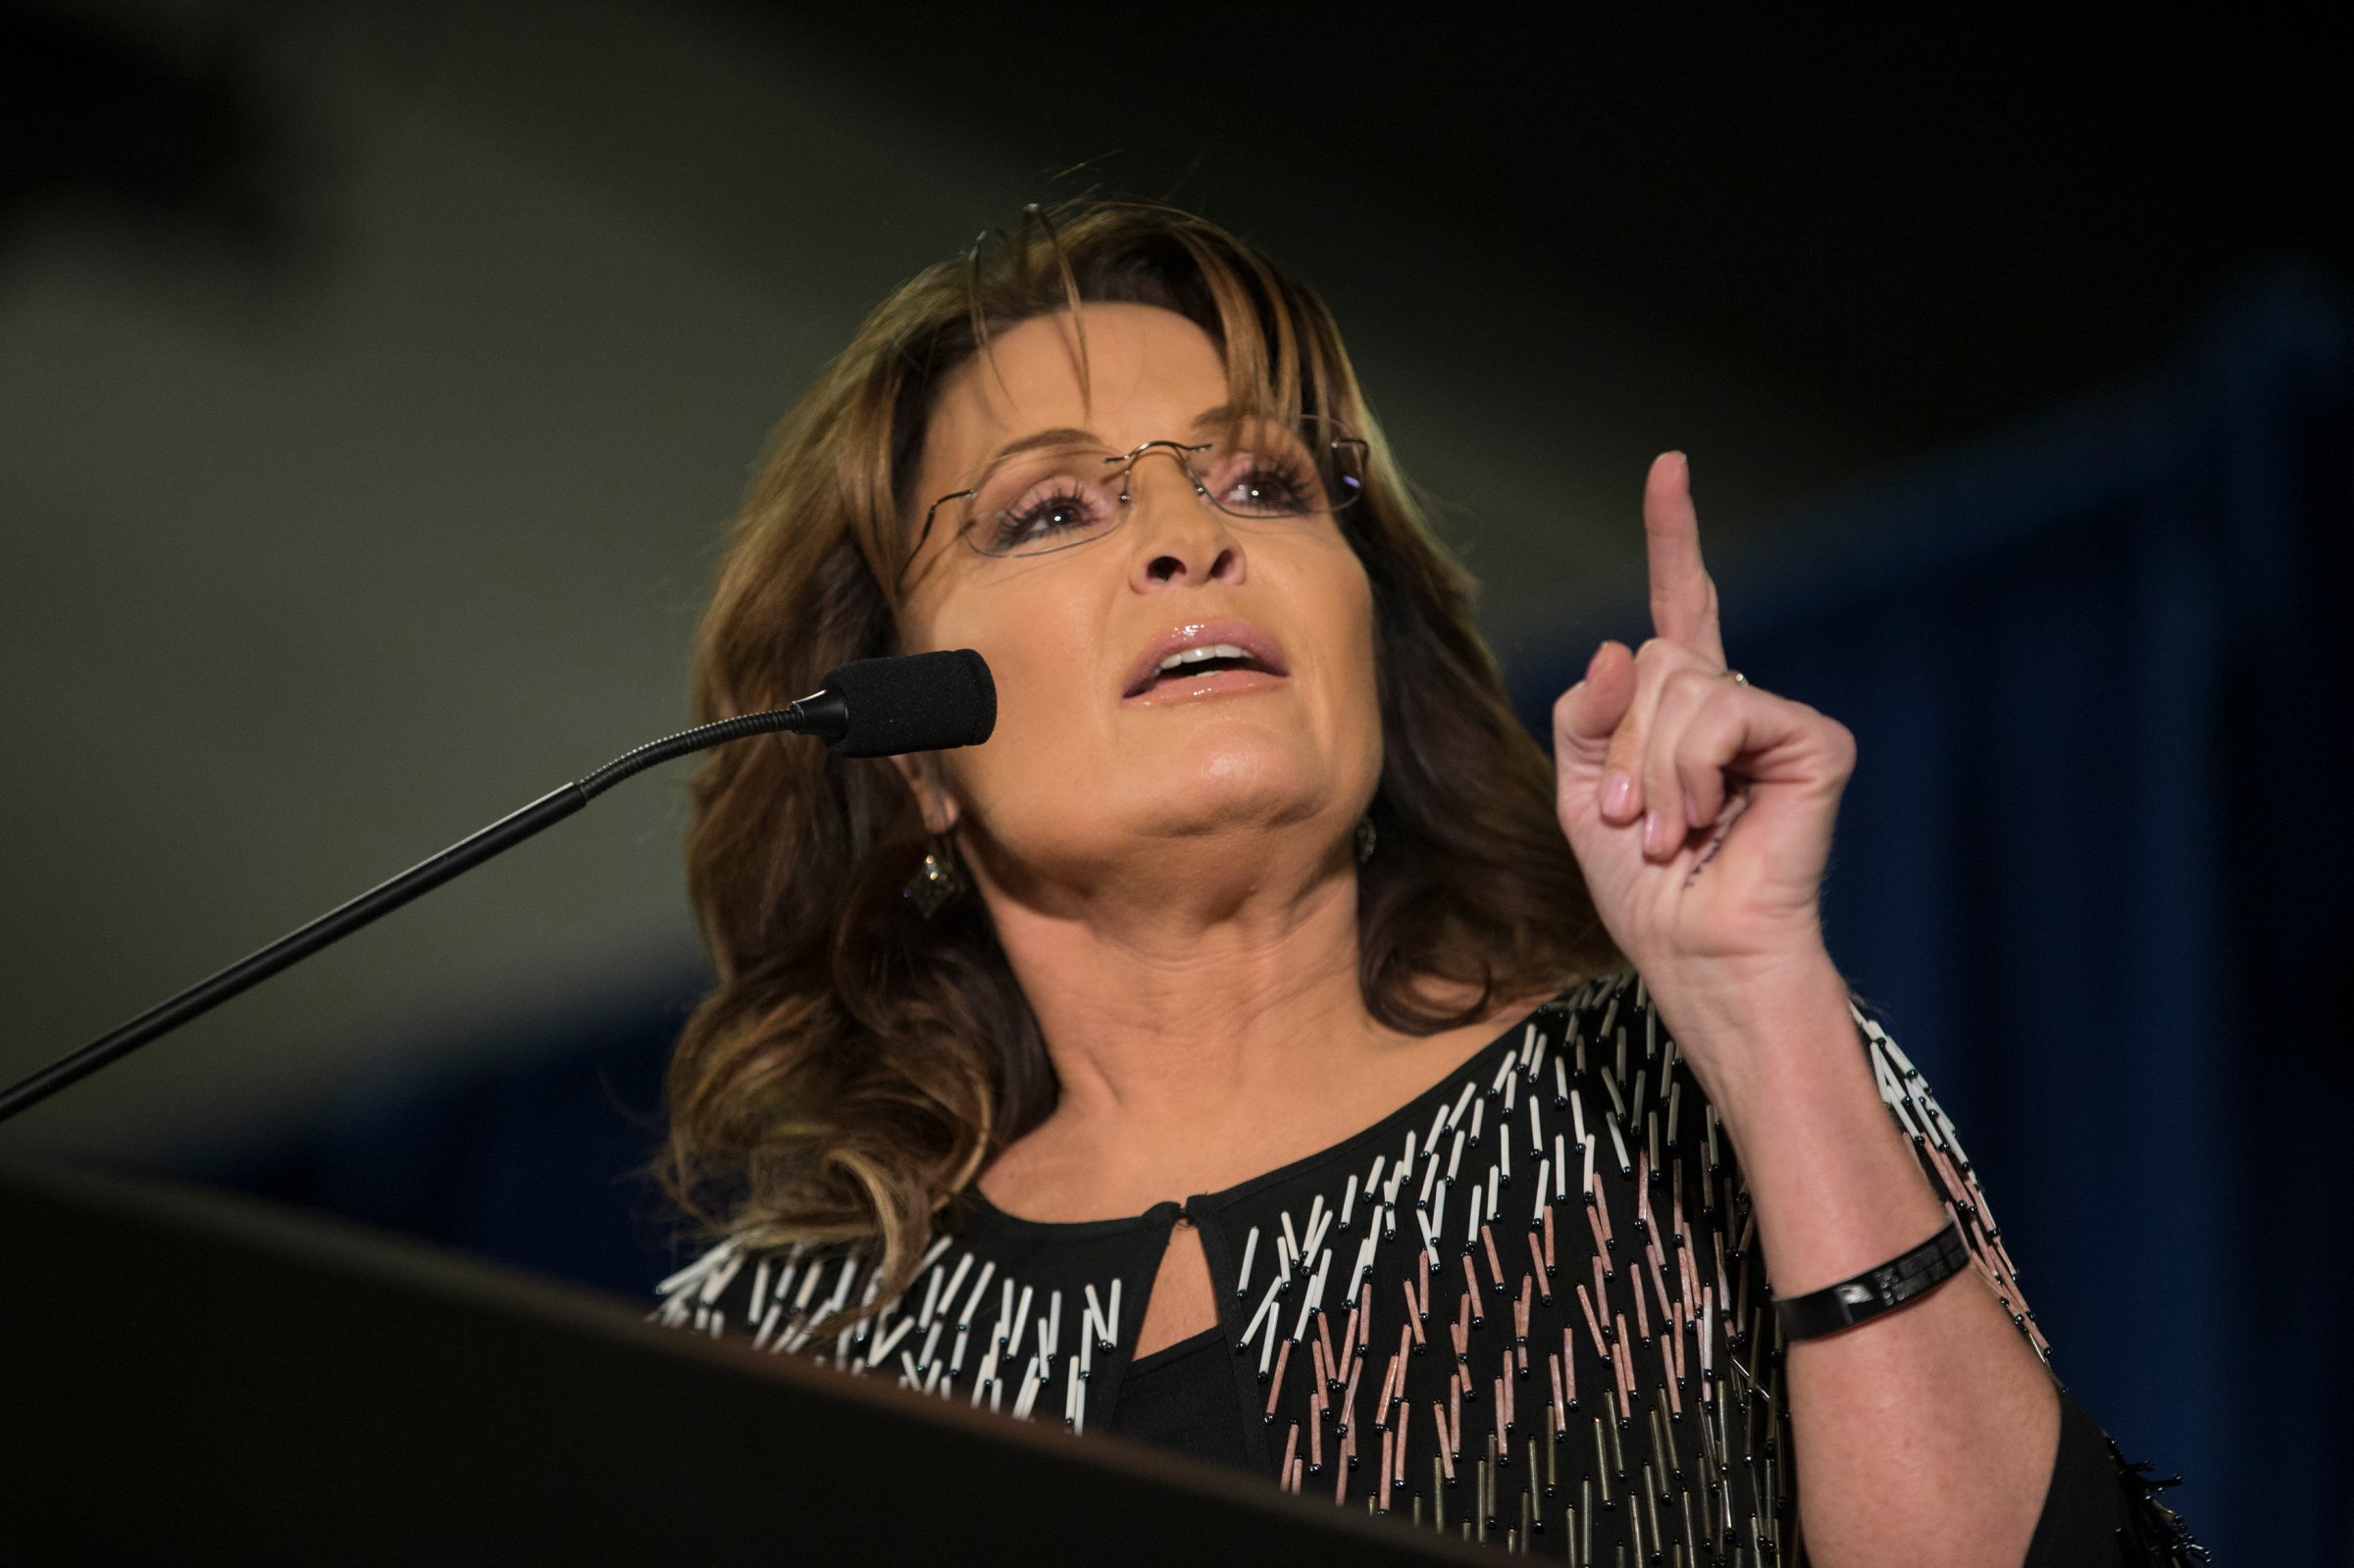 Former Alaska Gov. Sarah Palin speaks at Hansen Agriculture Student Learning Center at Iowa State University on Jan. 19, 2016 in Ames, IA.